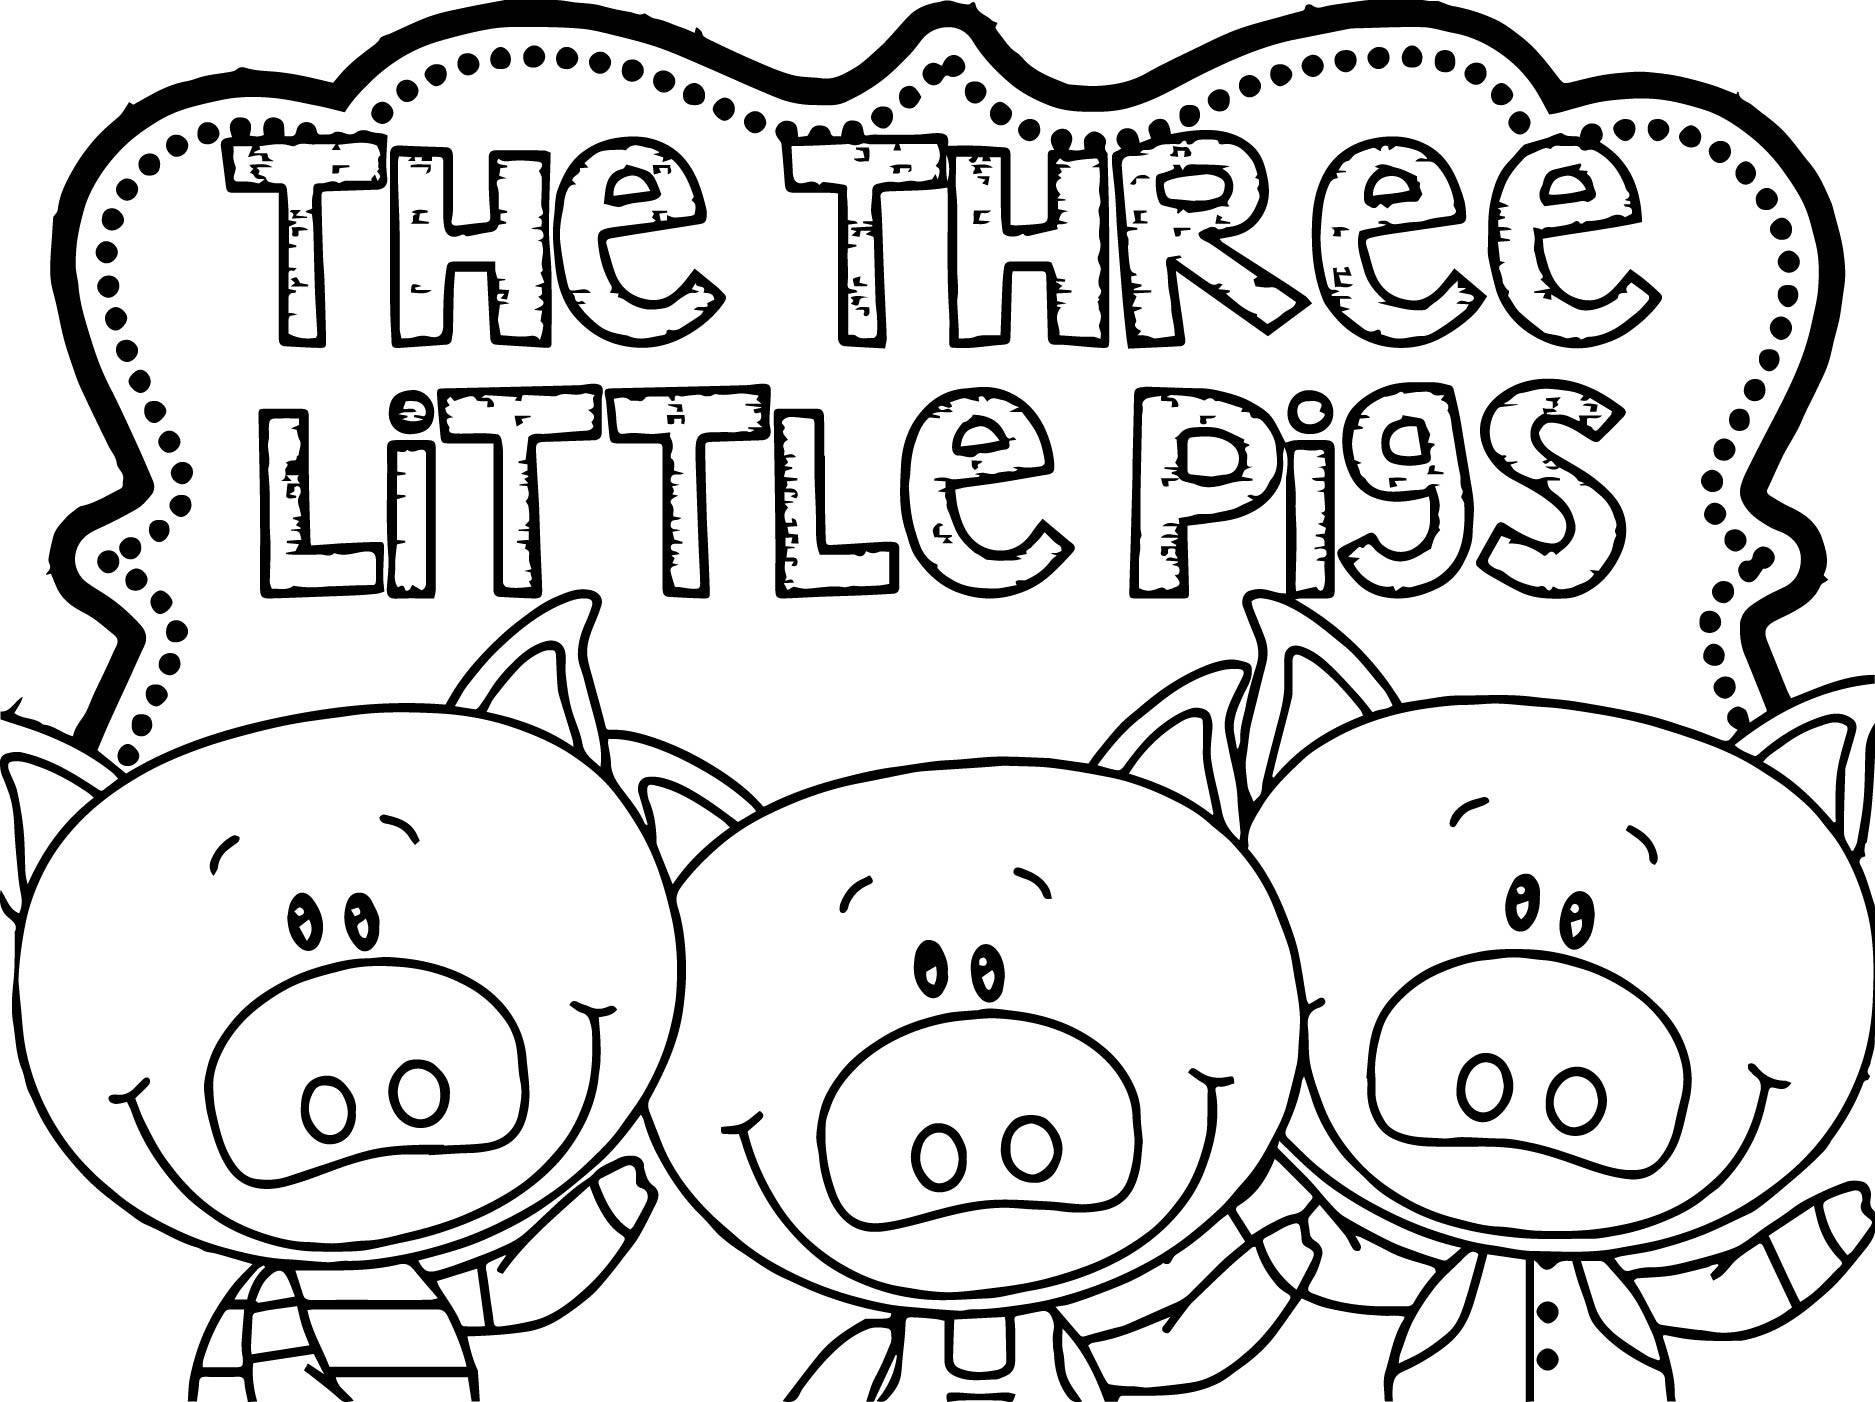 Preschool Coloring Sheets For The 3 Little Pigs Wolf
 Three Little Pigs Coloring Page